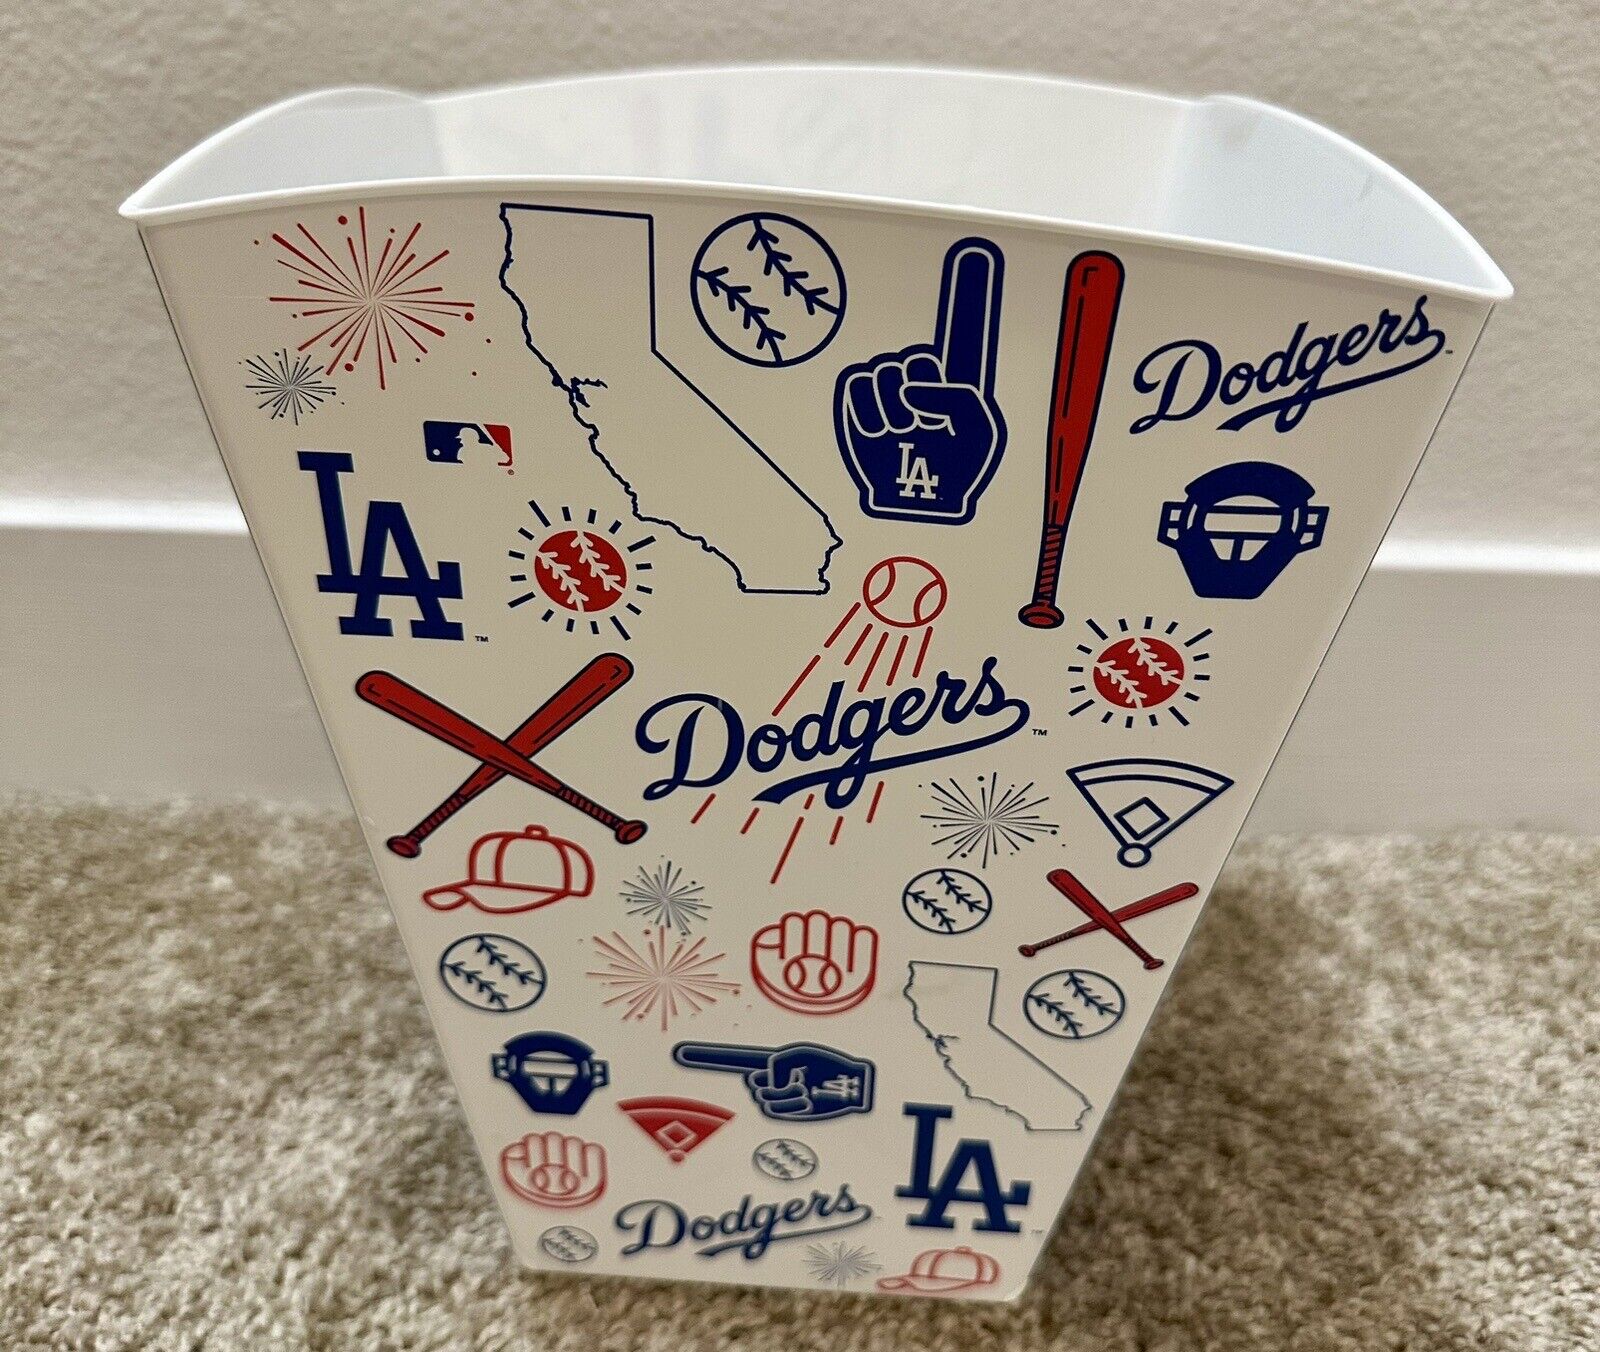 Los Angeles Dodgers 2020 |  Popcorn Bucket/Container From Dodgers Stadium | MLB